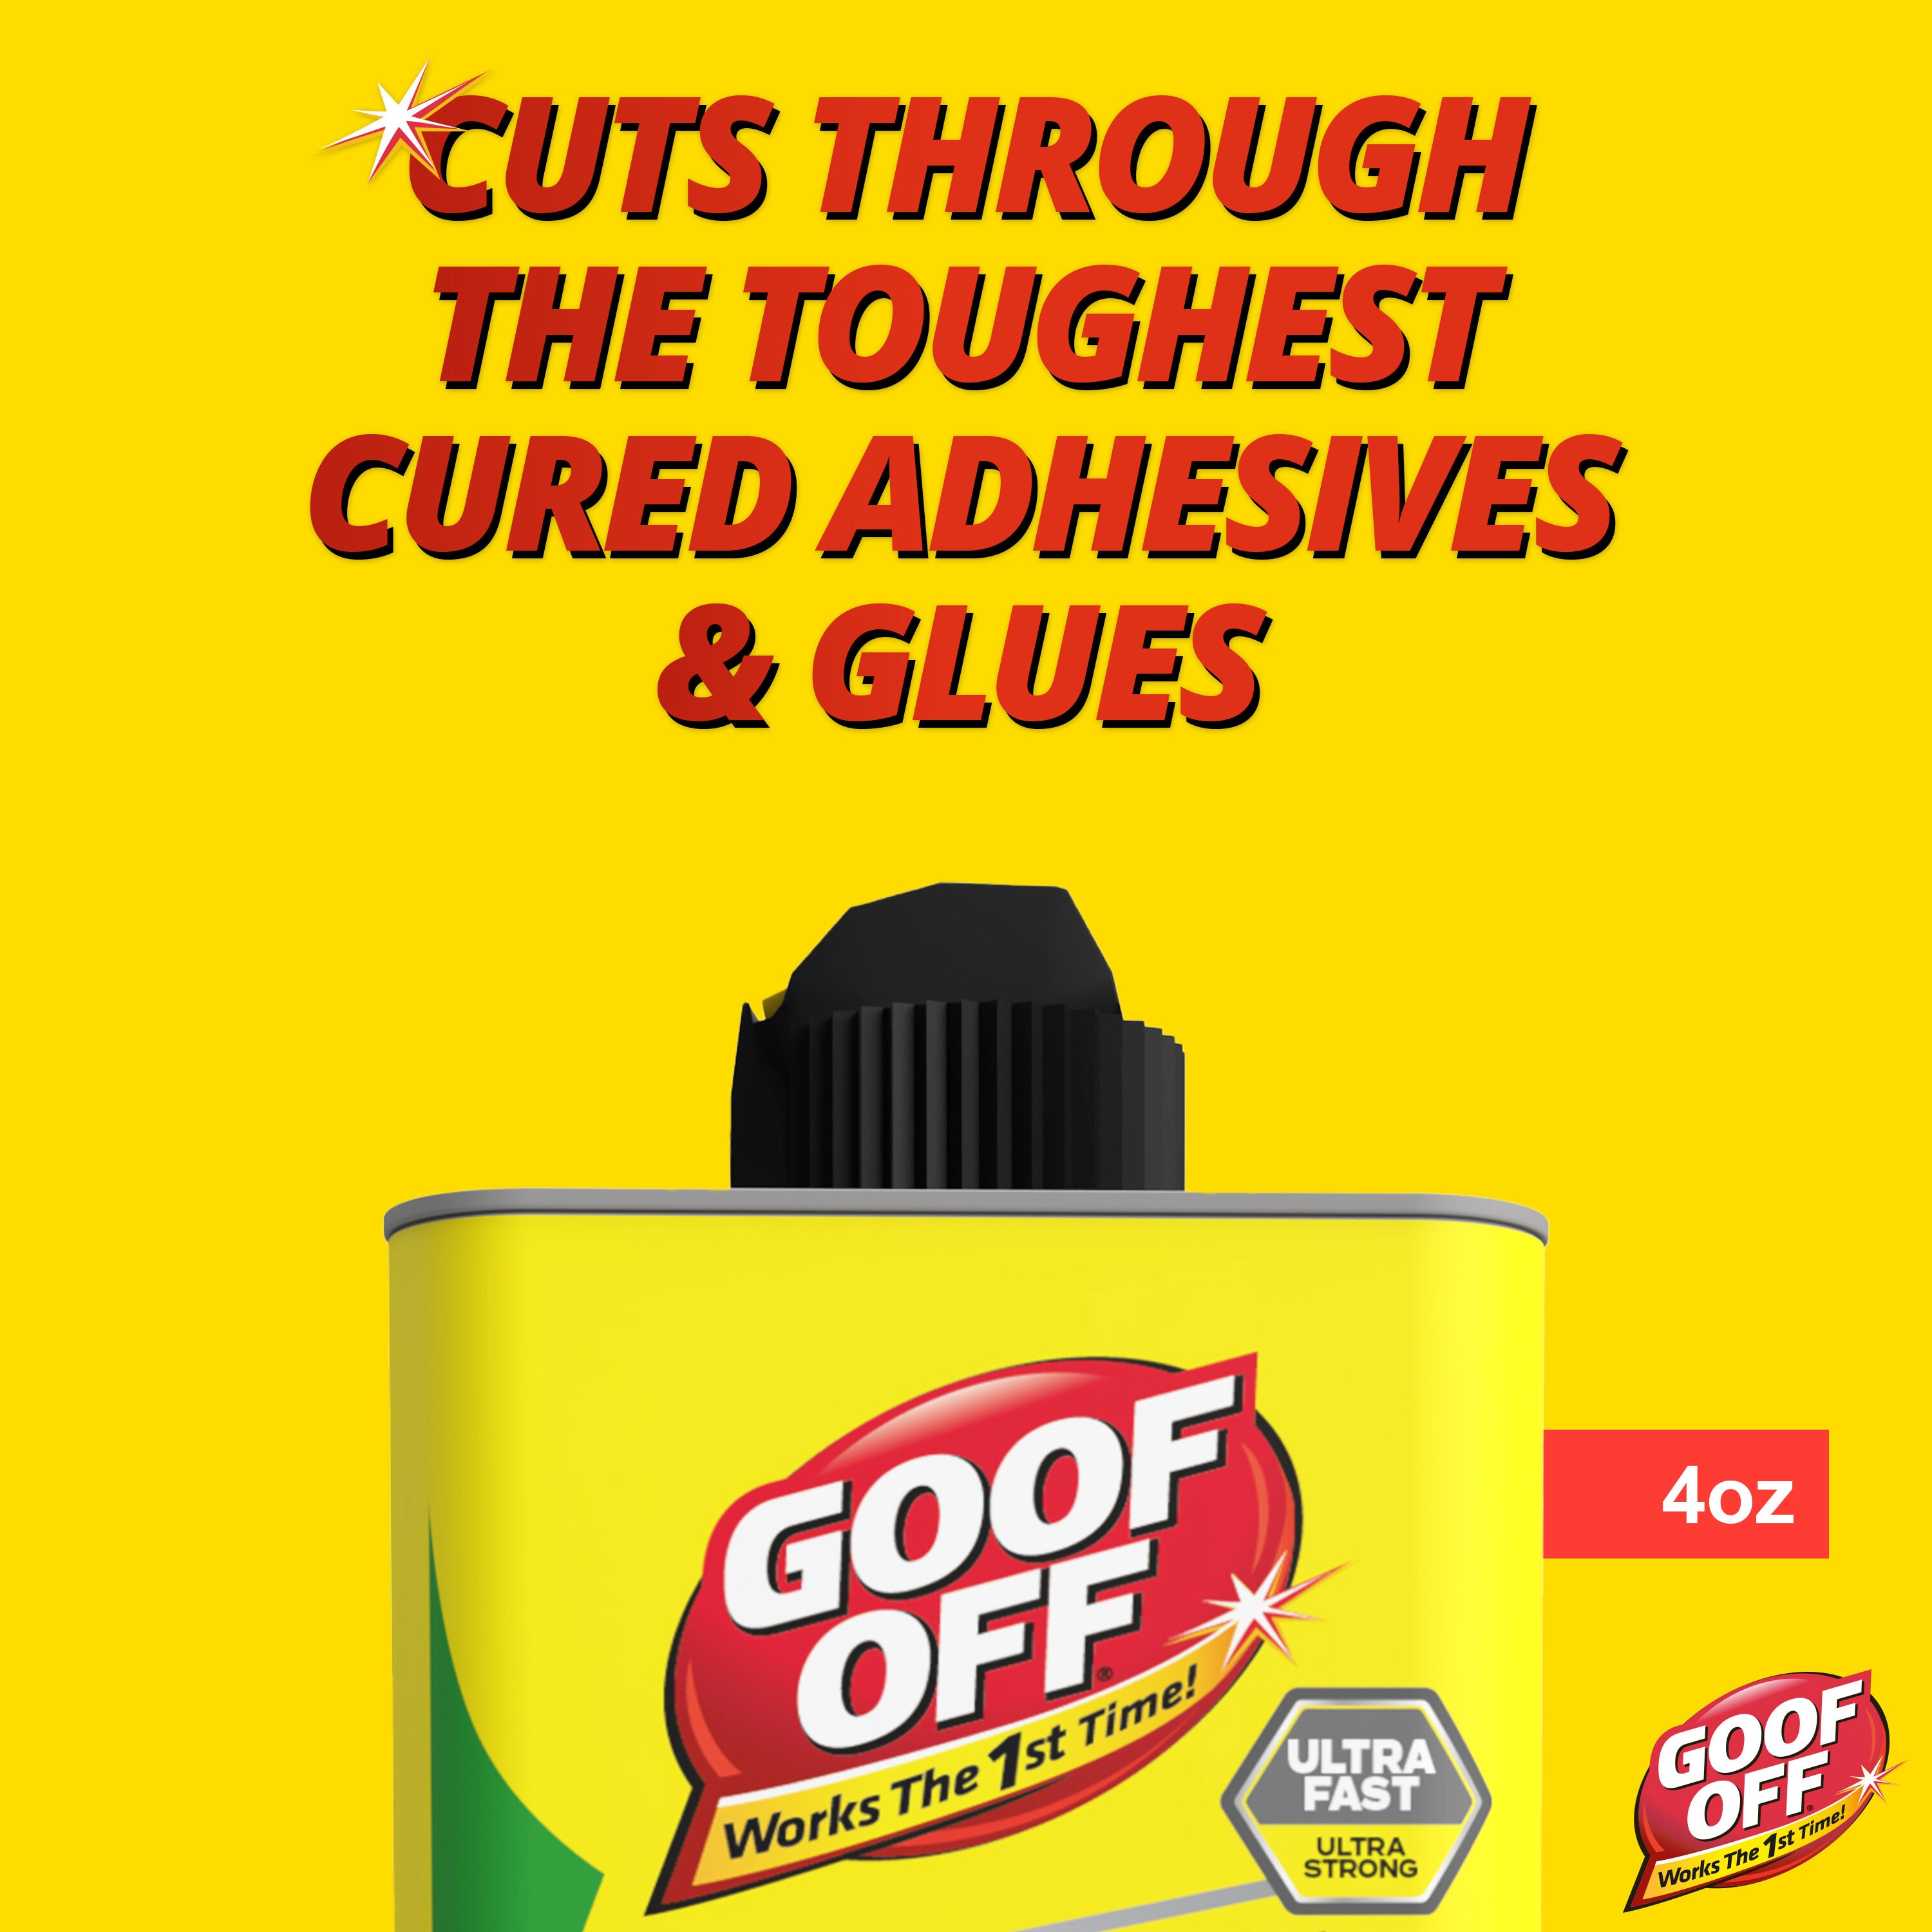 Goo Gone 12-fl oz Adhesive Remover Spray Gel - Safe for Surfaces